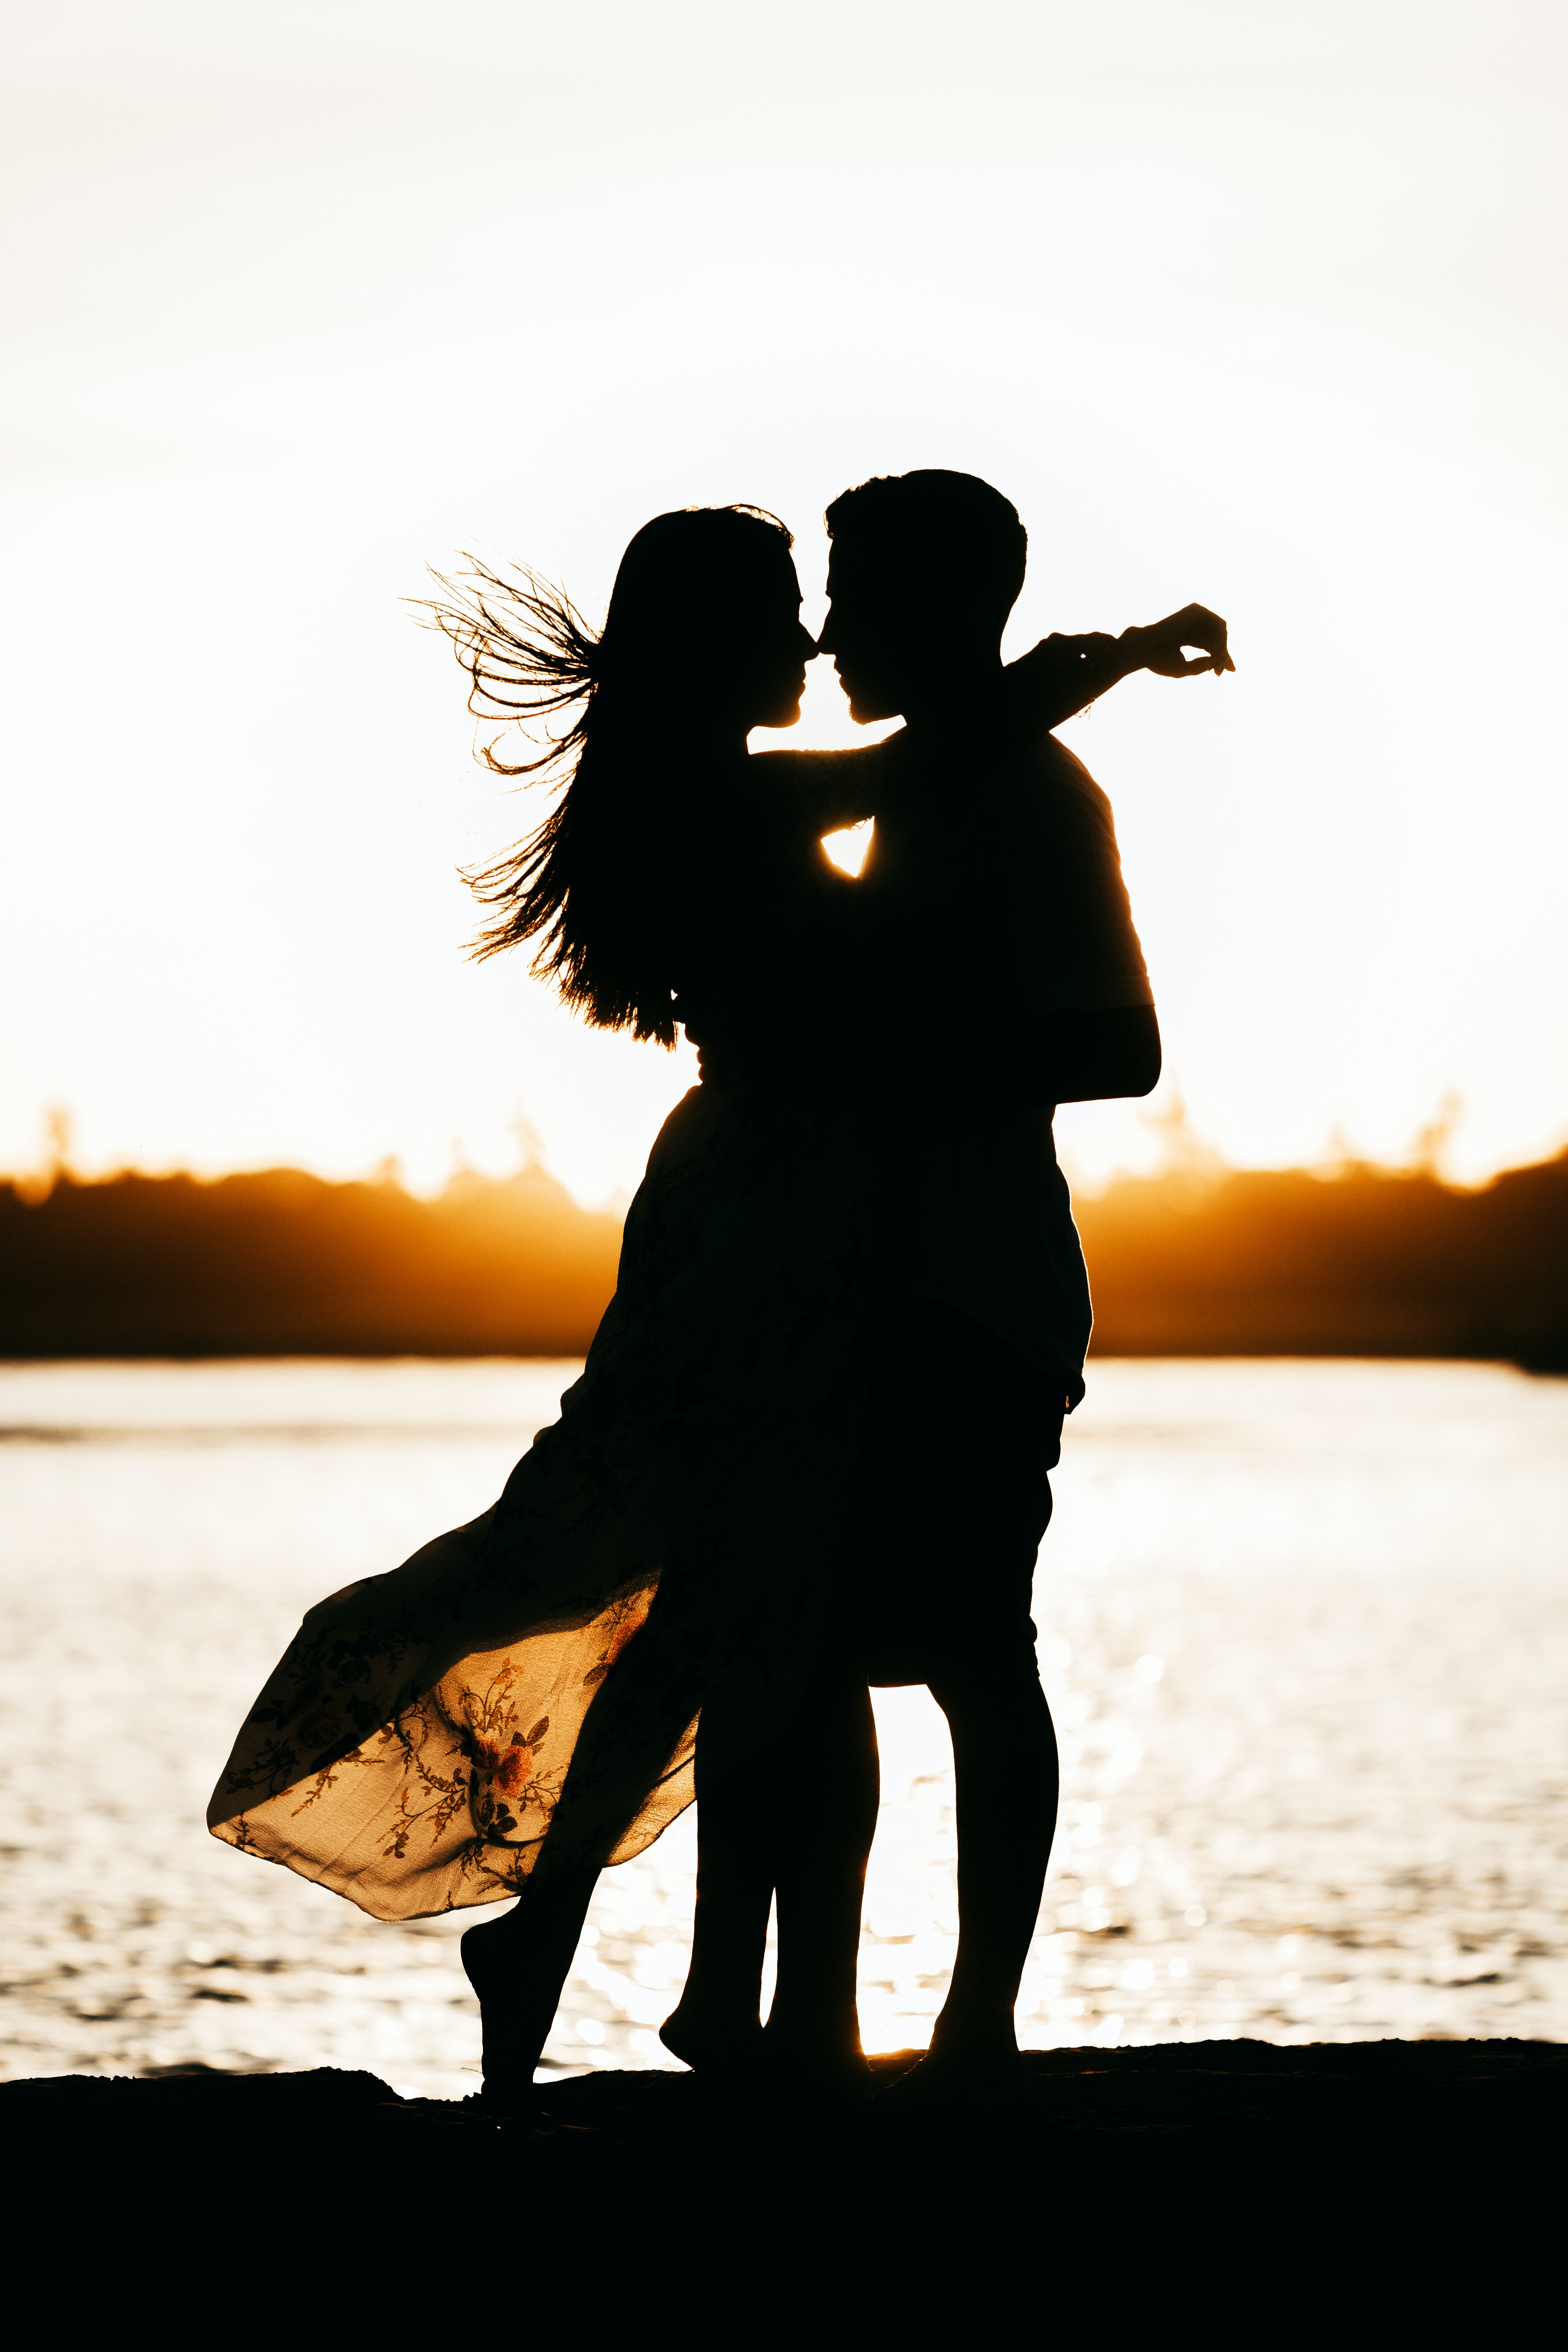 Silhouette of couple facing each other | Source: Unsplash